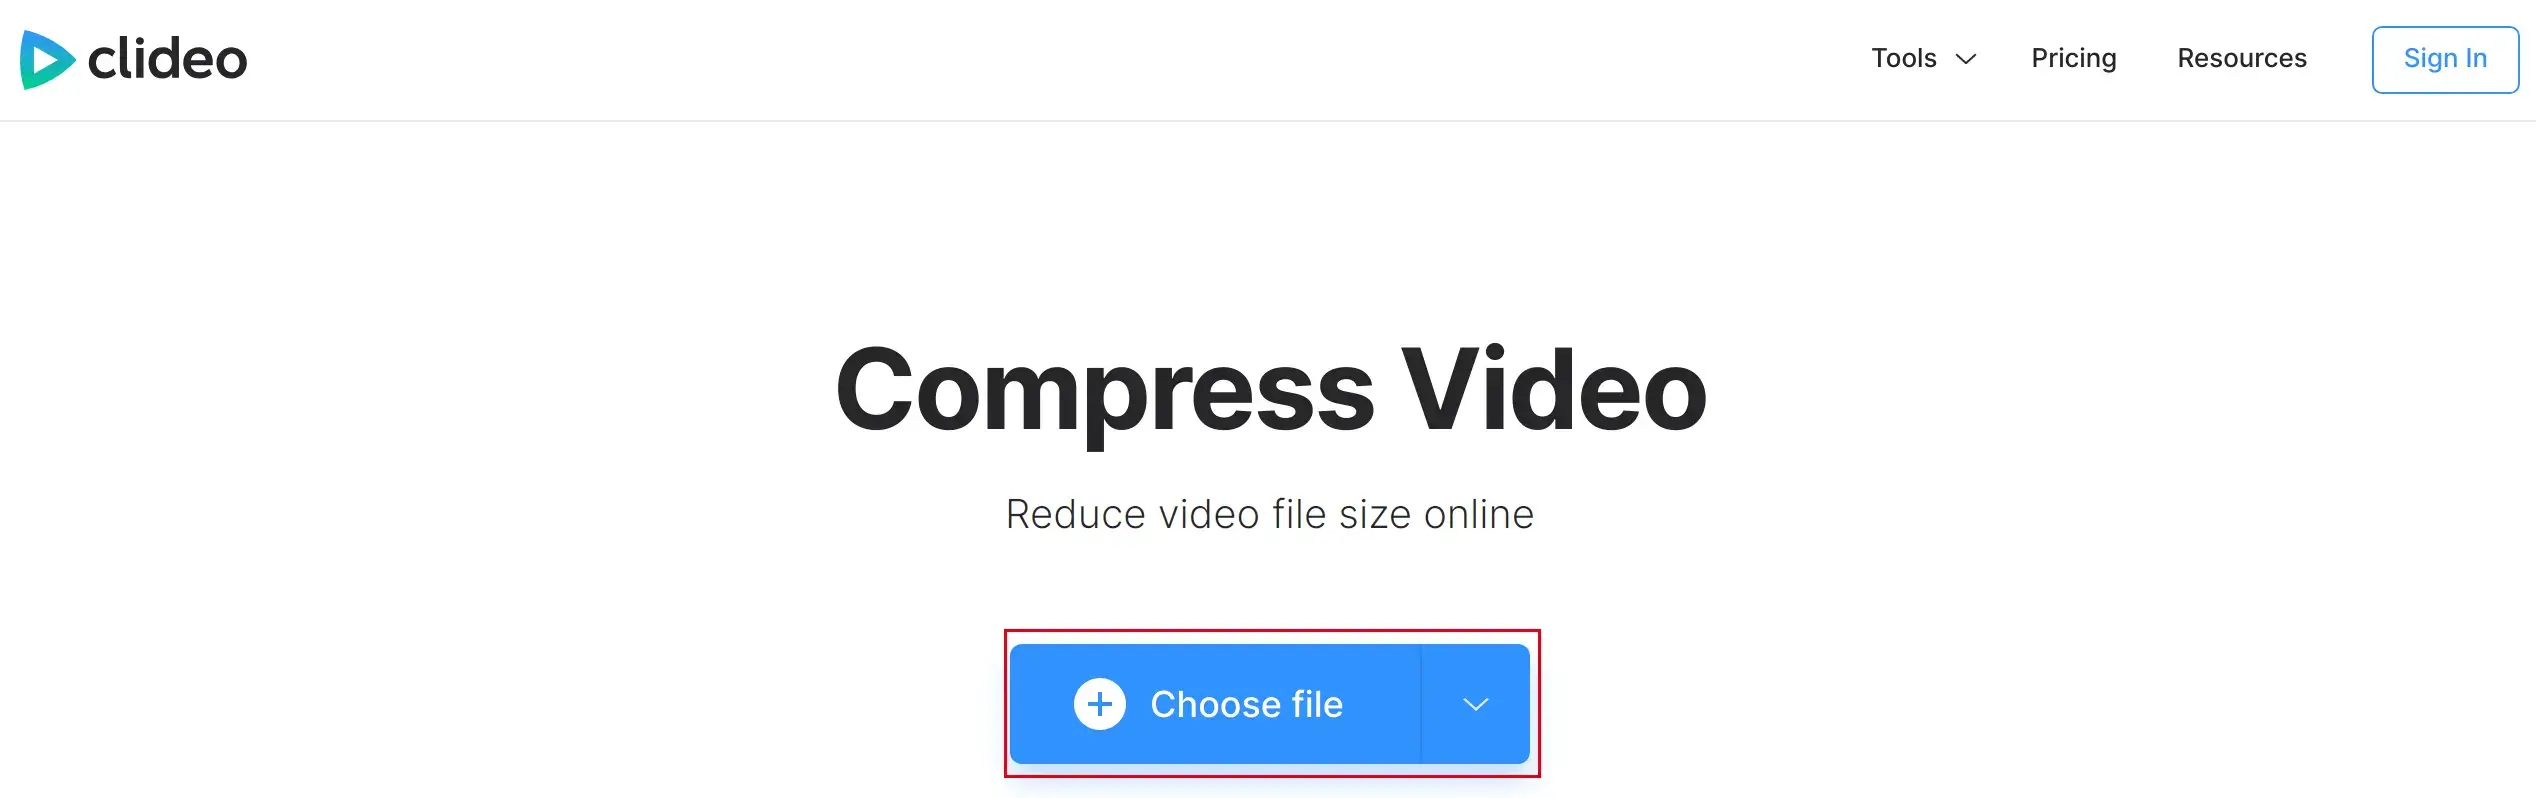 compress large video files for email in clideo step 2